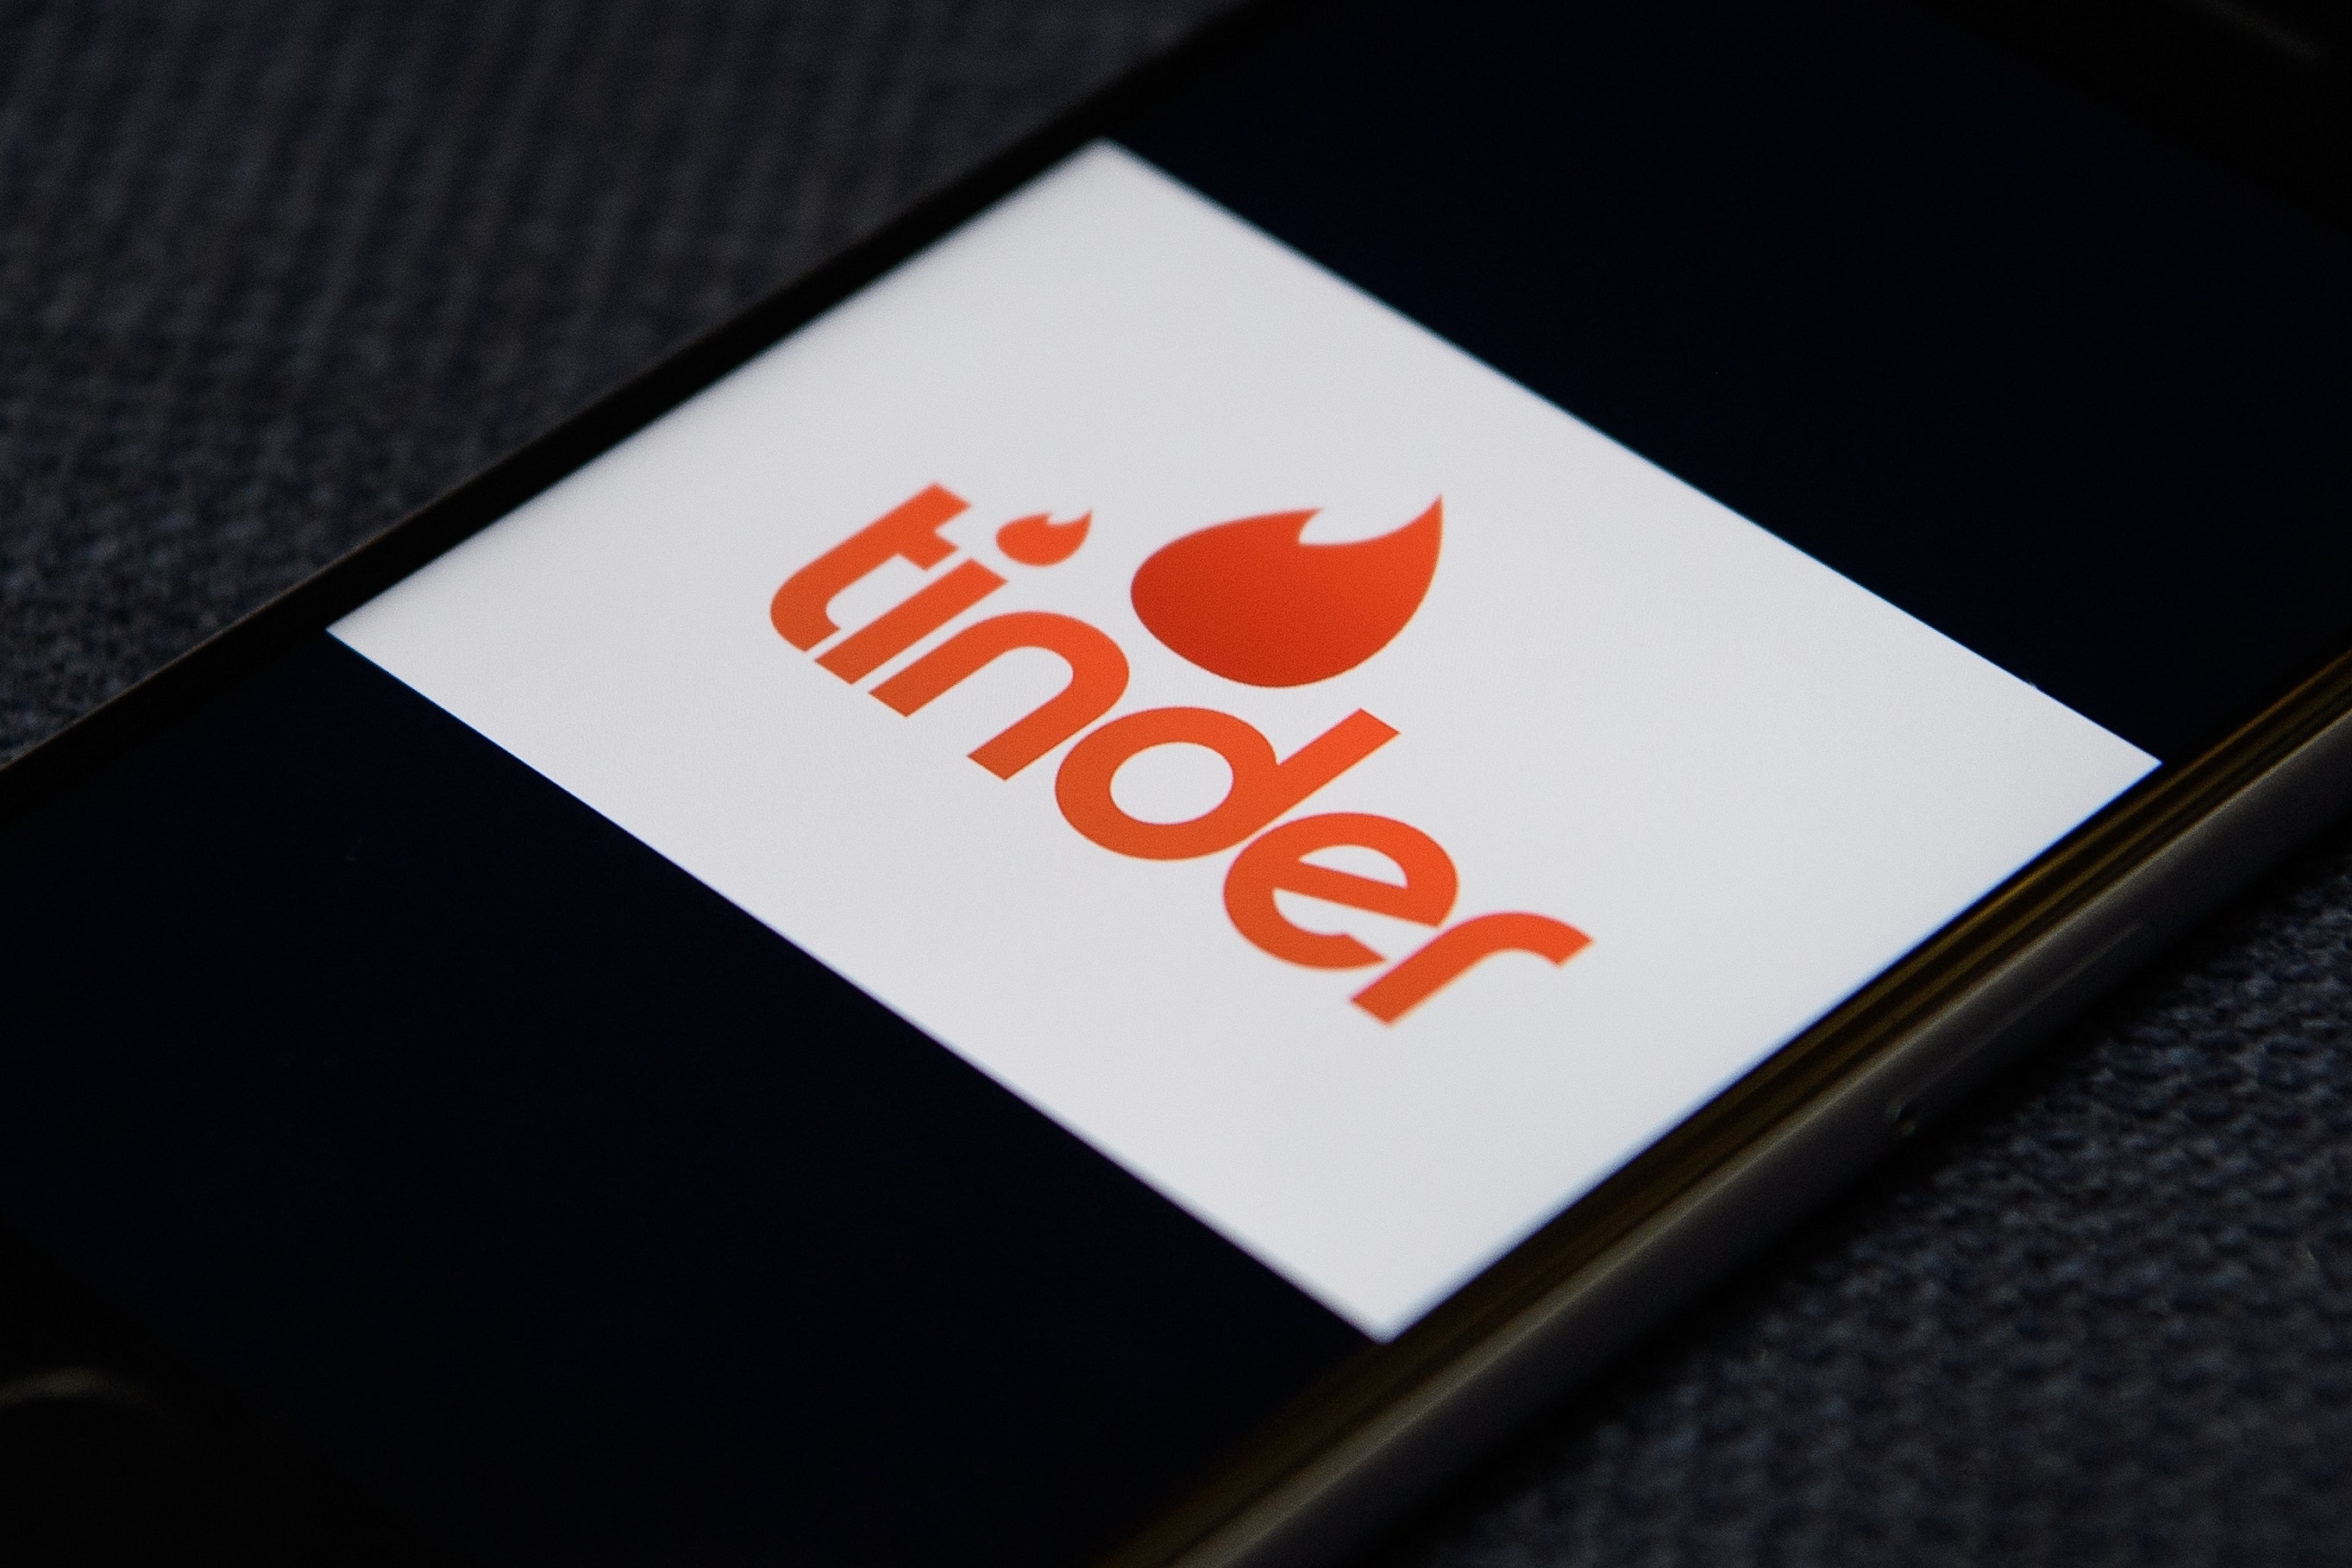 Nightmare Tinder date allegedly held woman captive for days before rescue